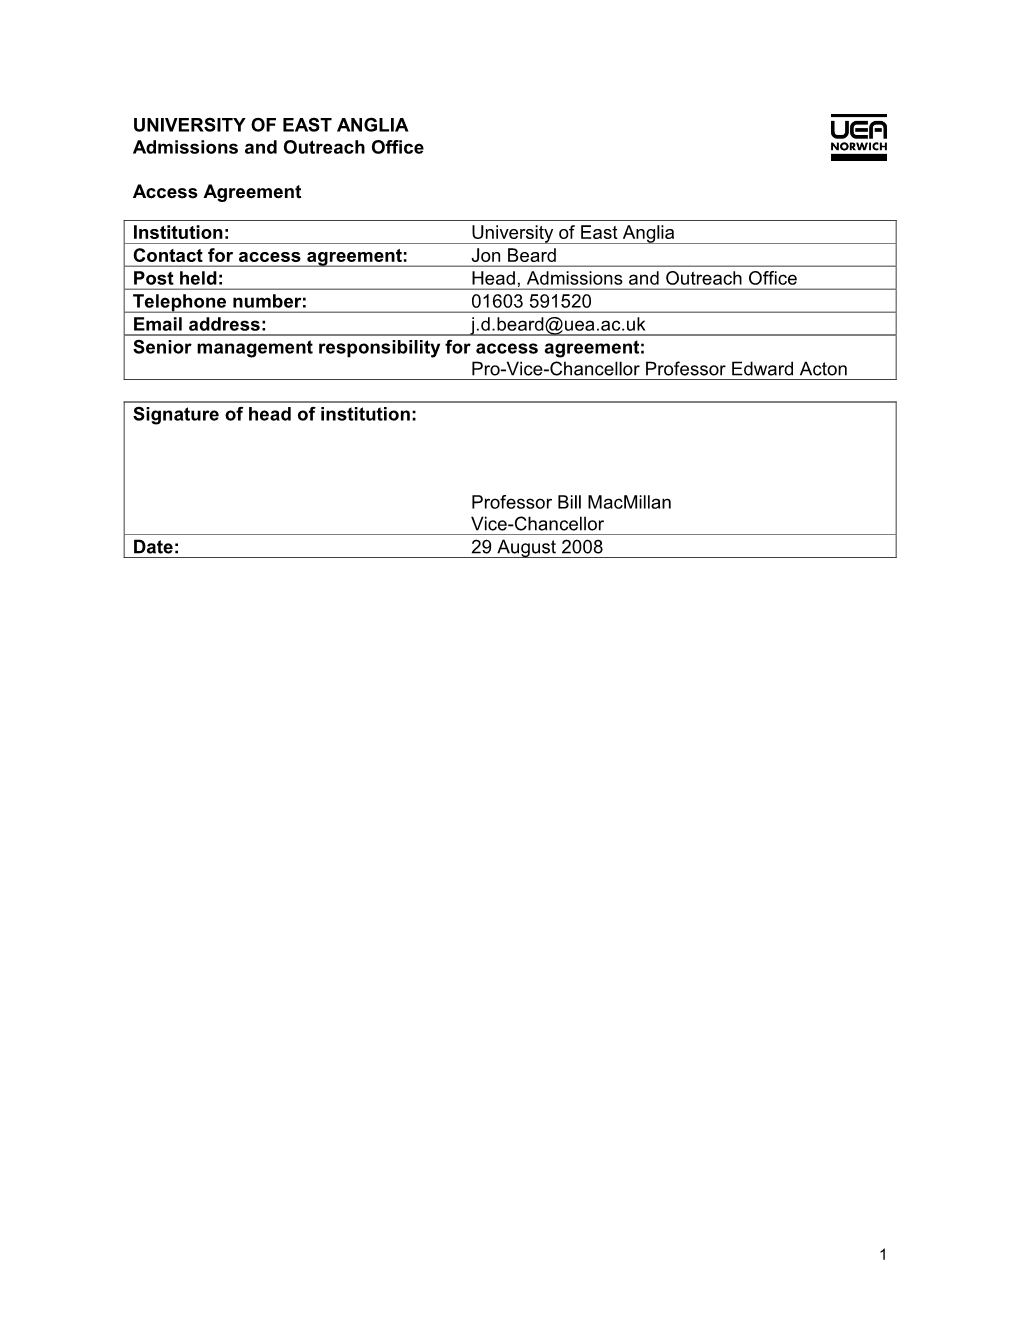 UEA Access Agreement 2009-10 Approved 03-10-2008